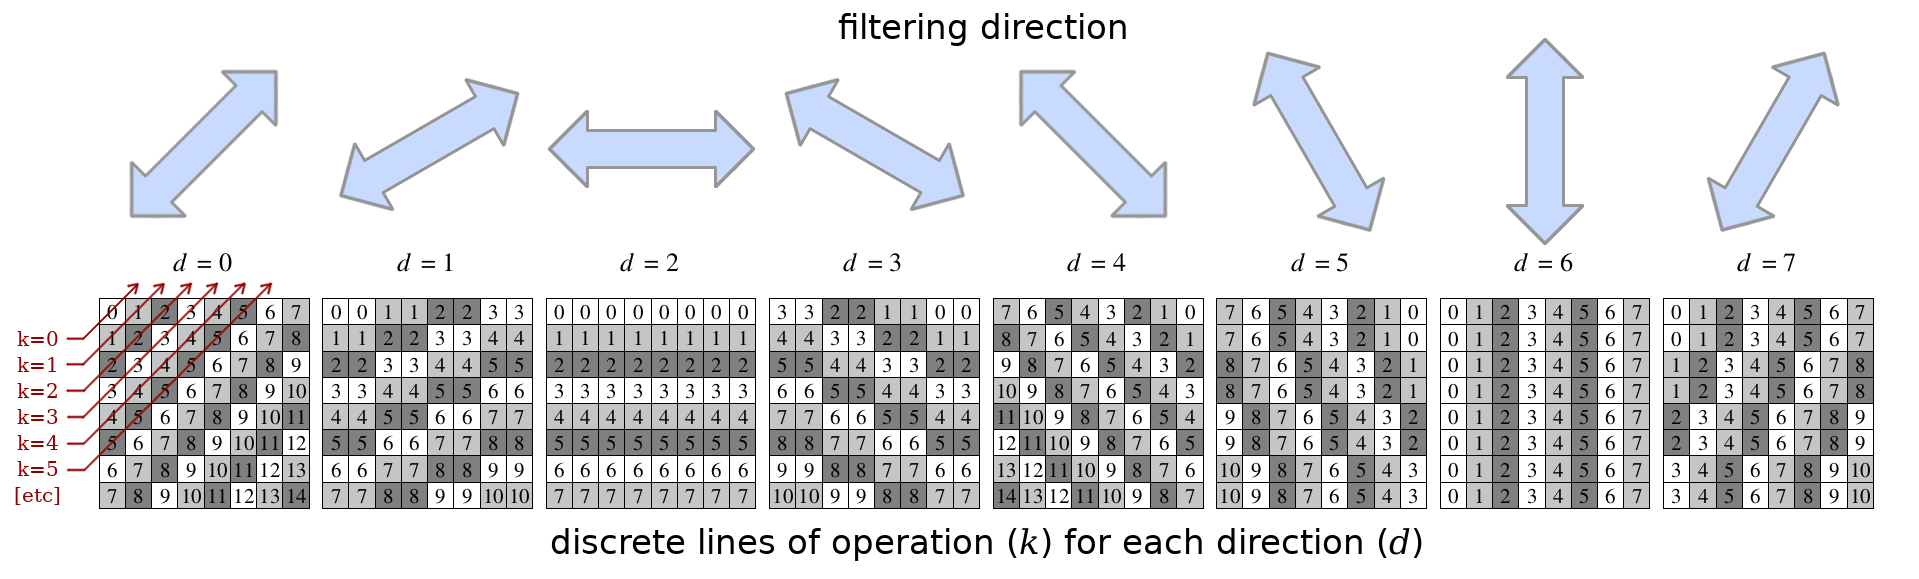 filtering direction with discrete lines of operation for each direction